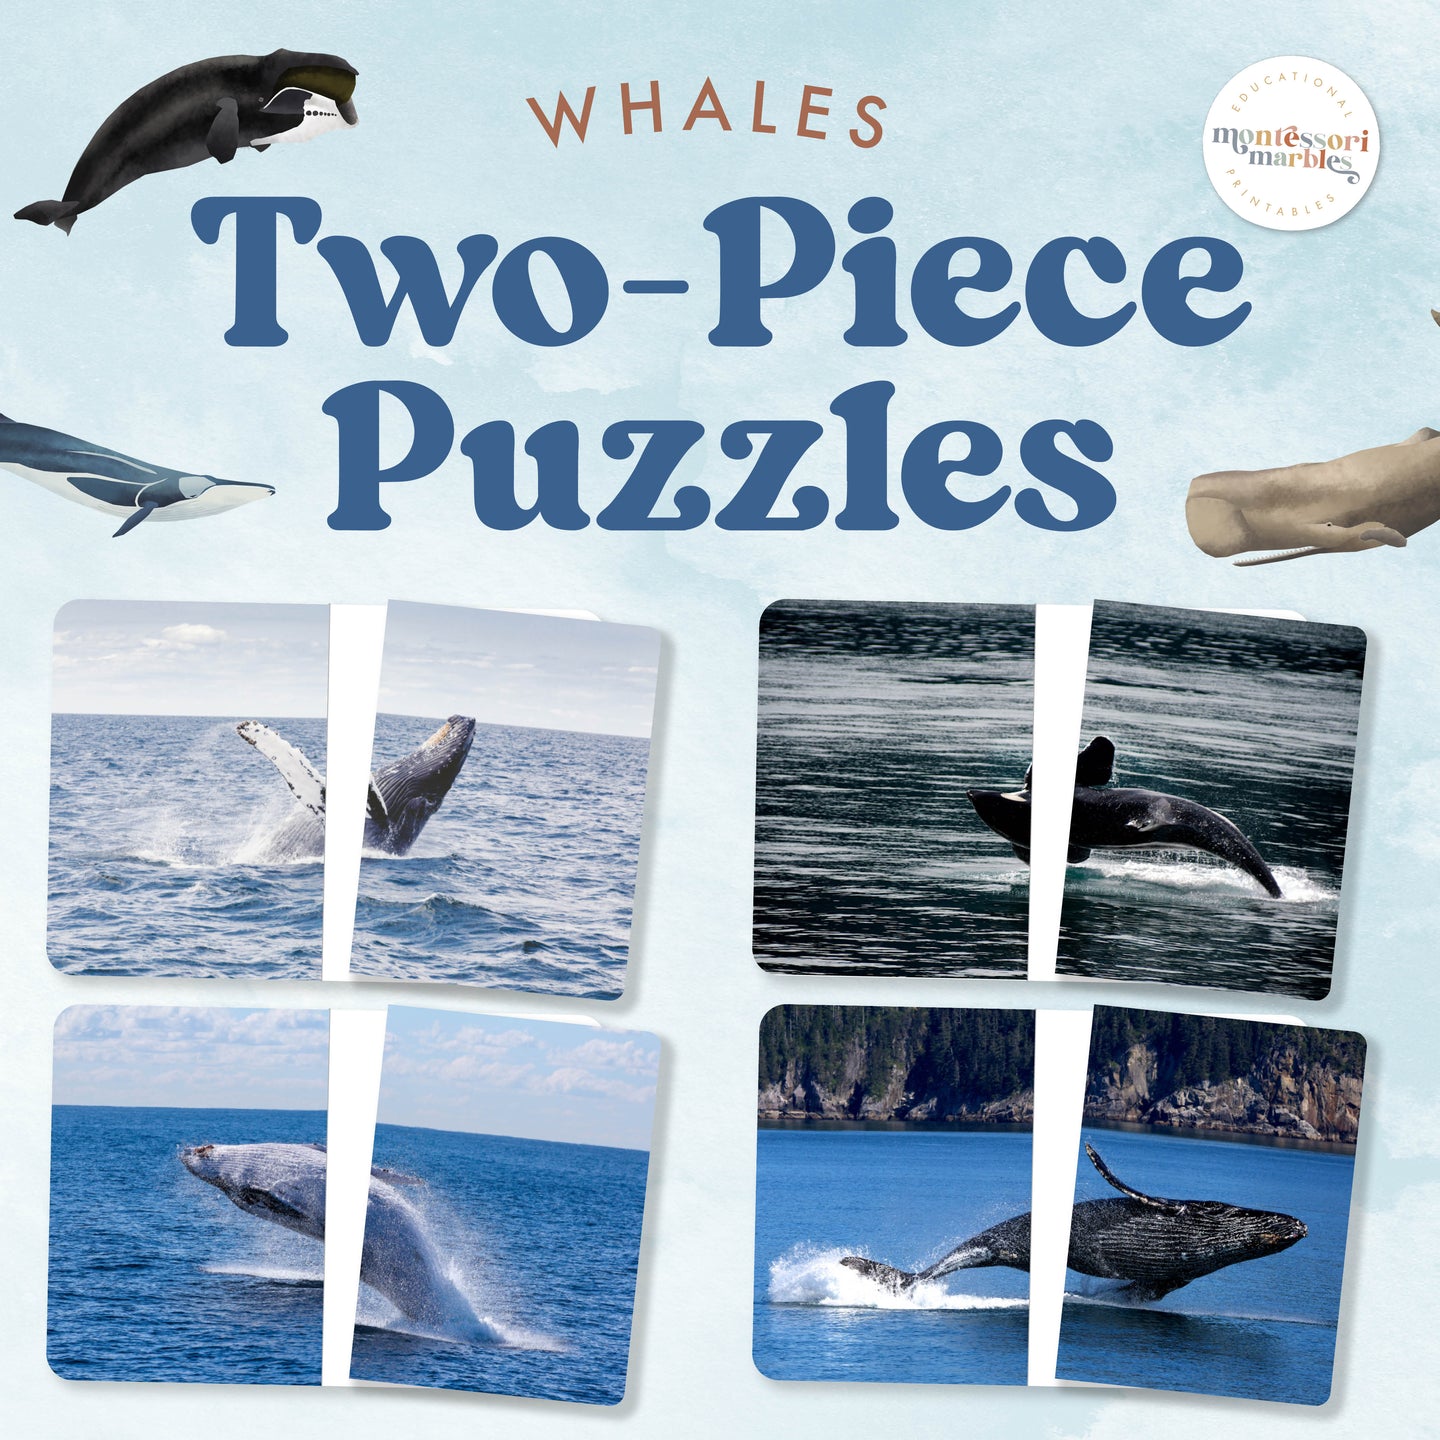 Whales Complete The Pictures